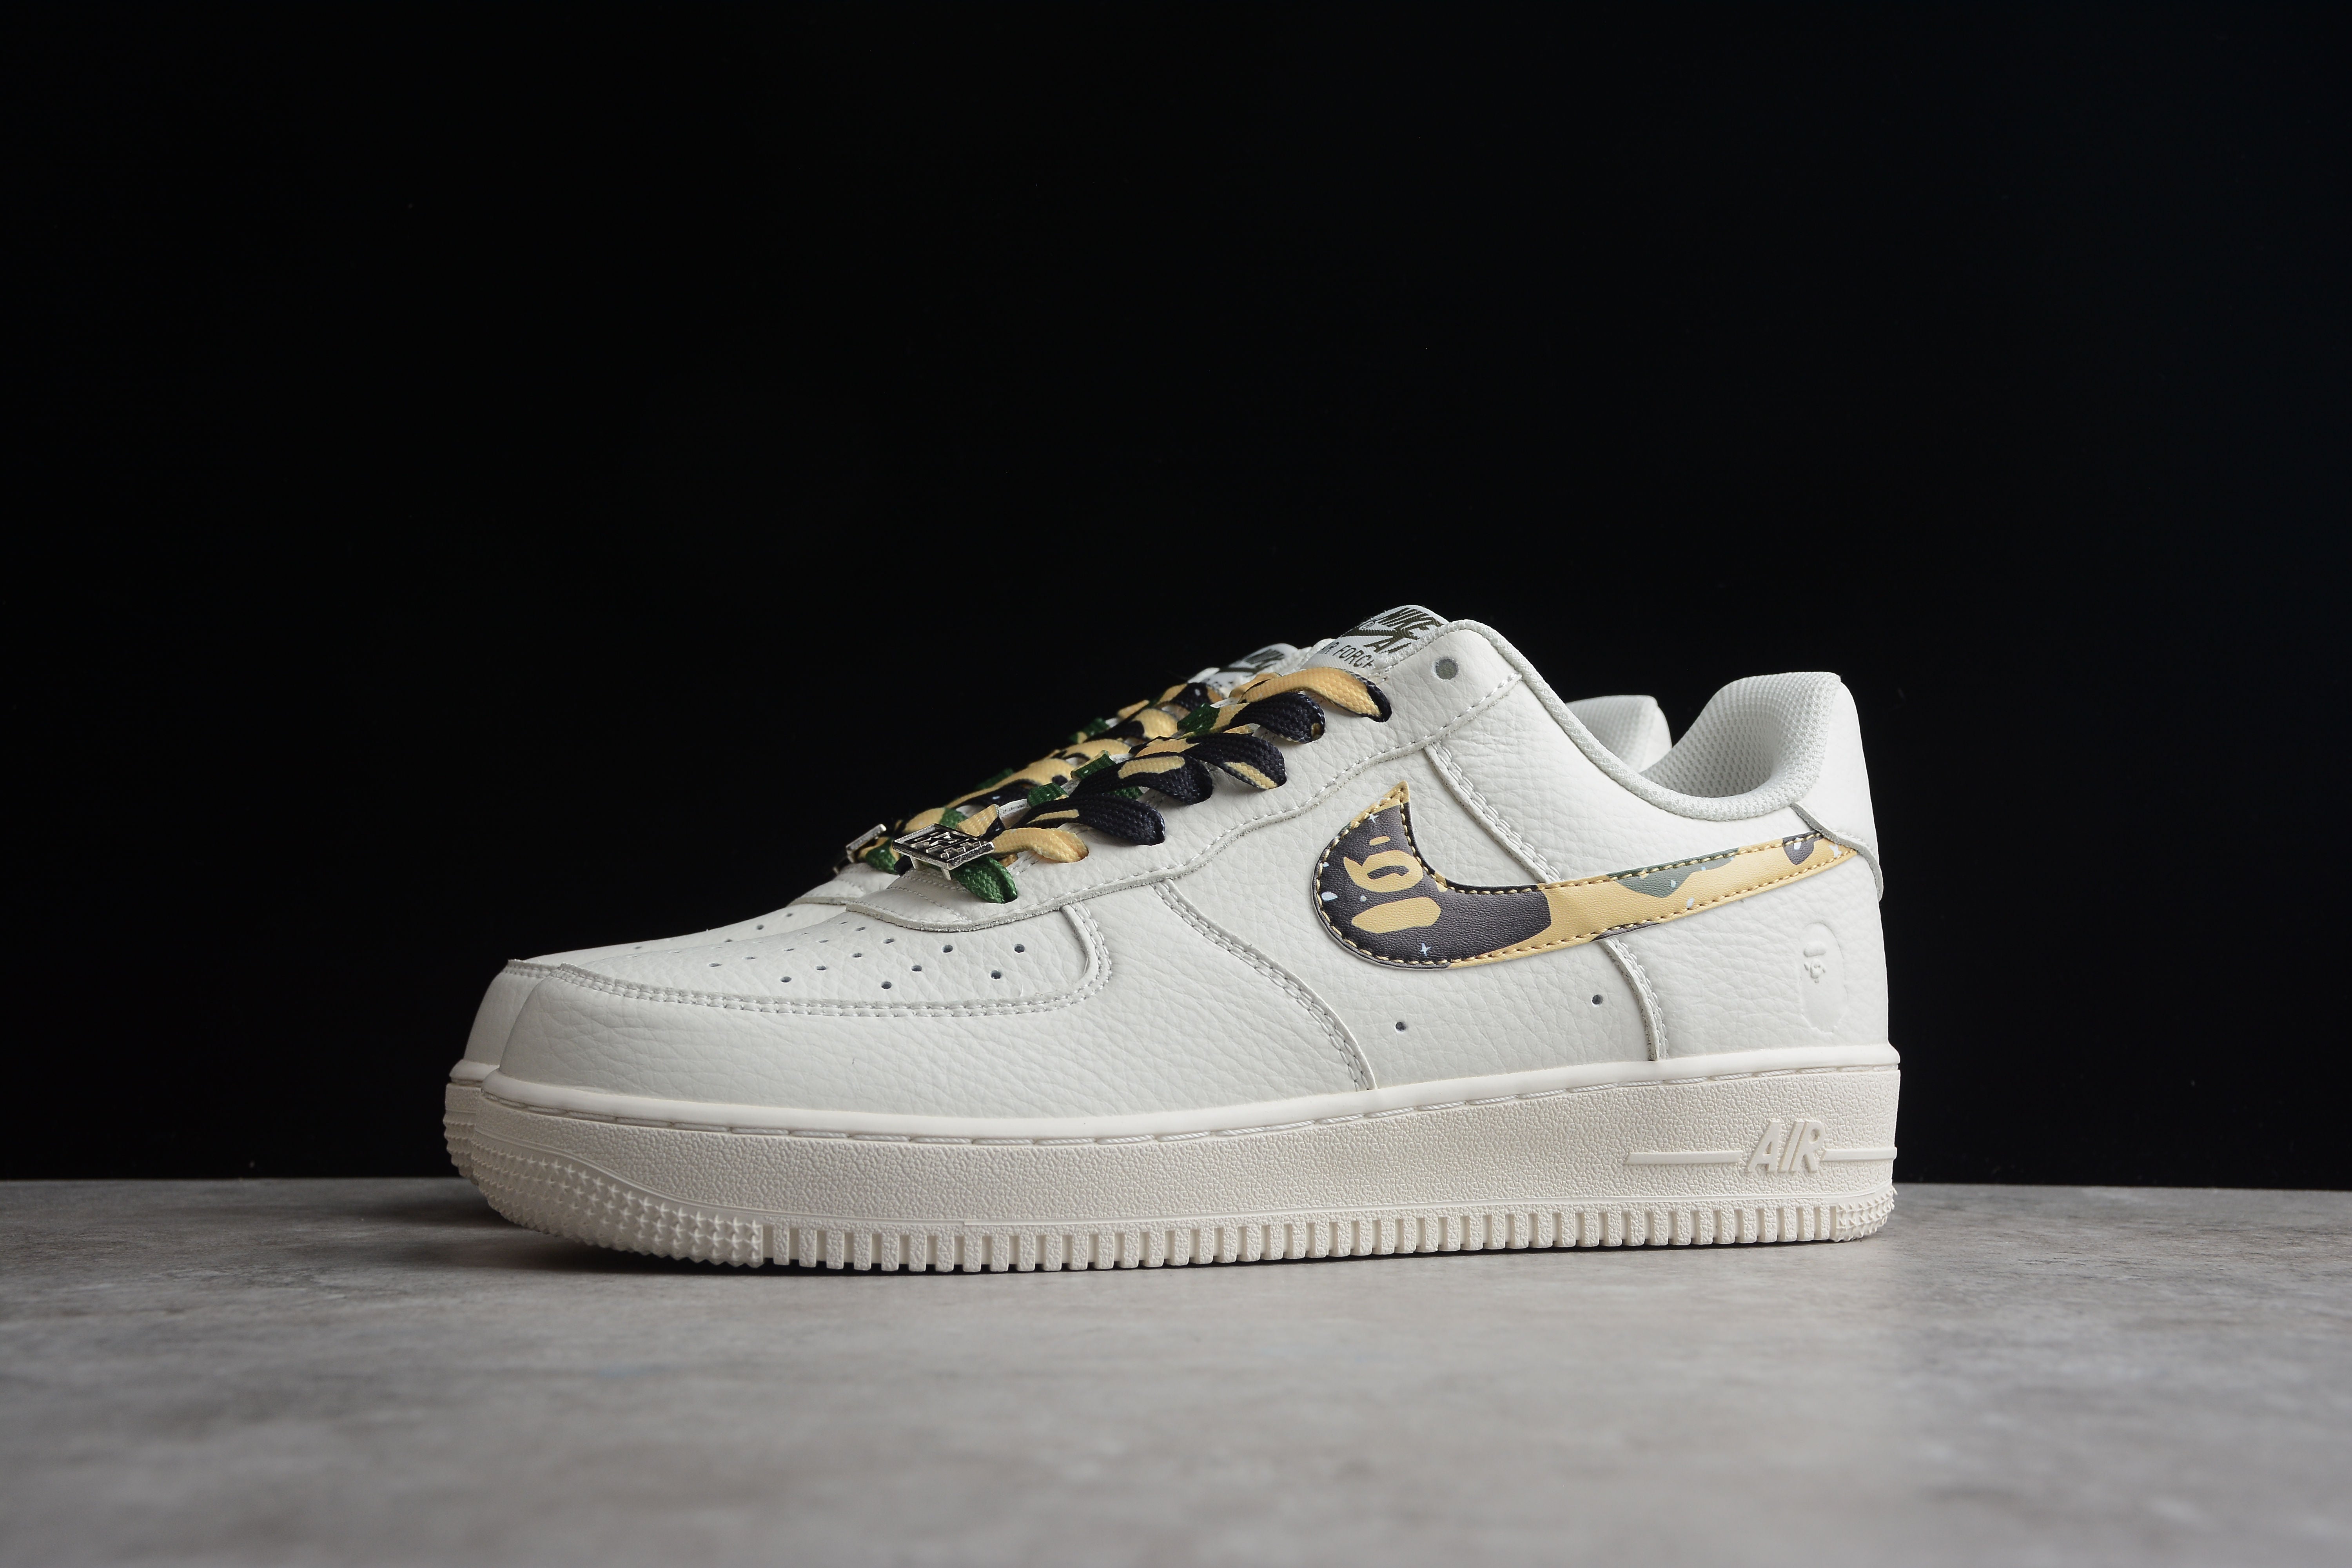 Nike airforce A1 army shoes